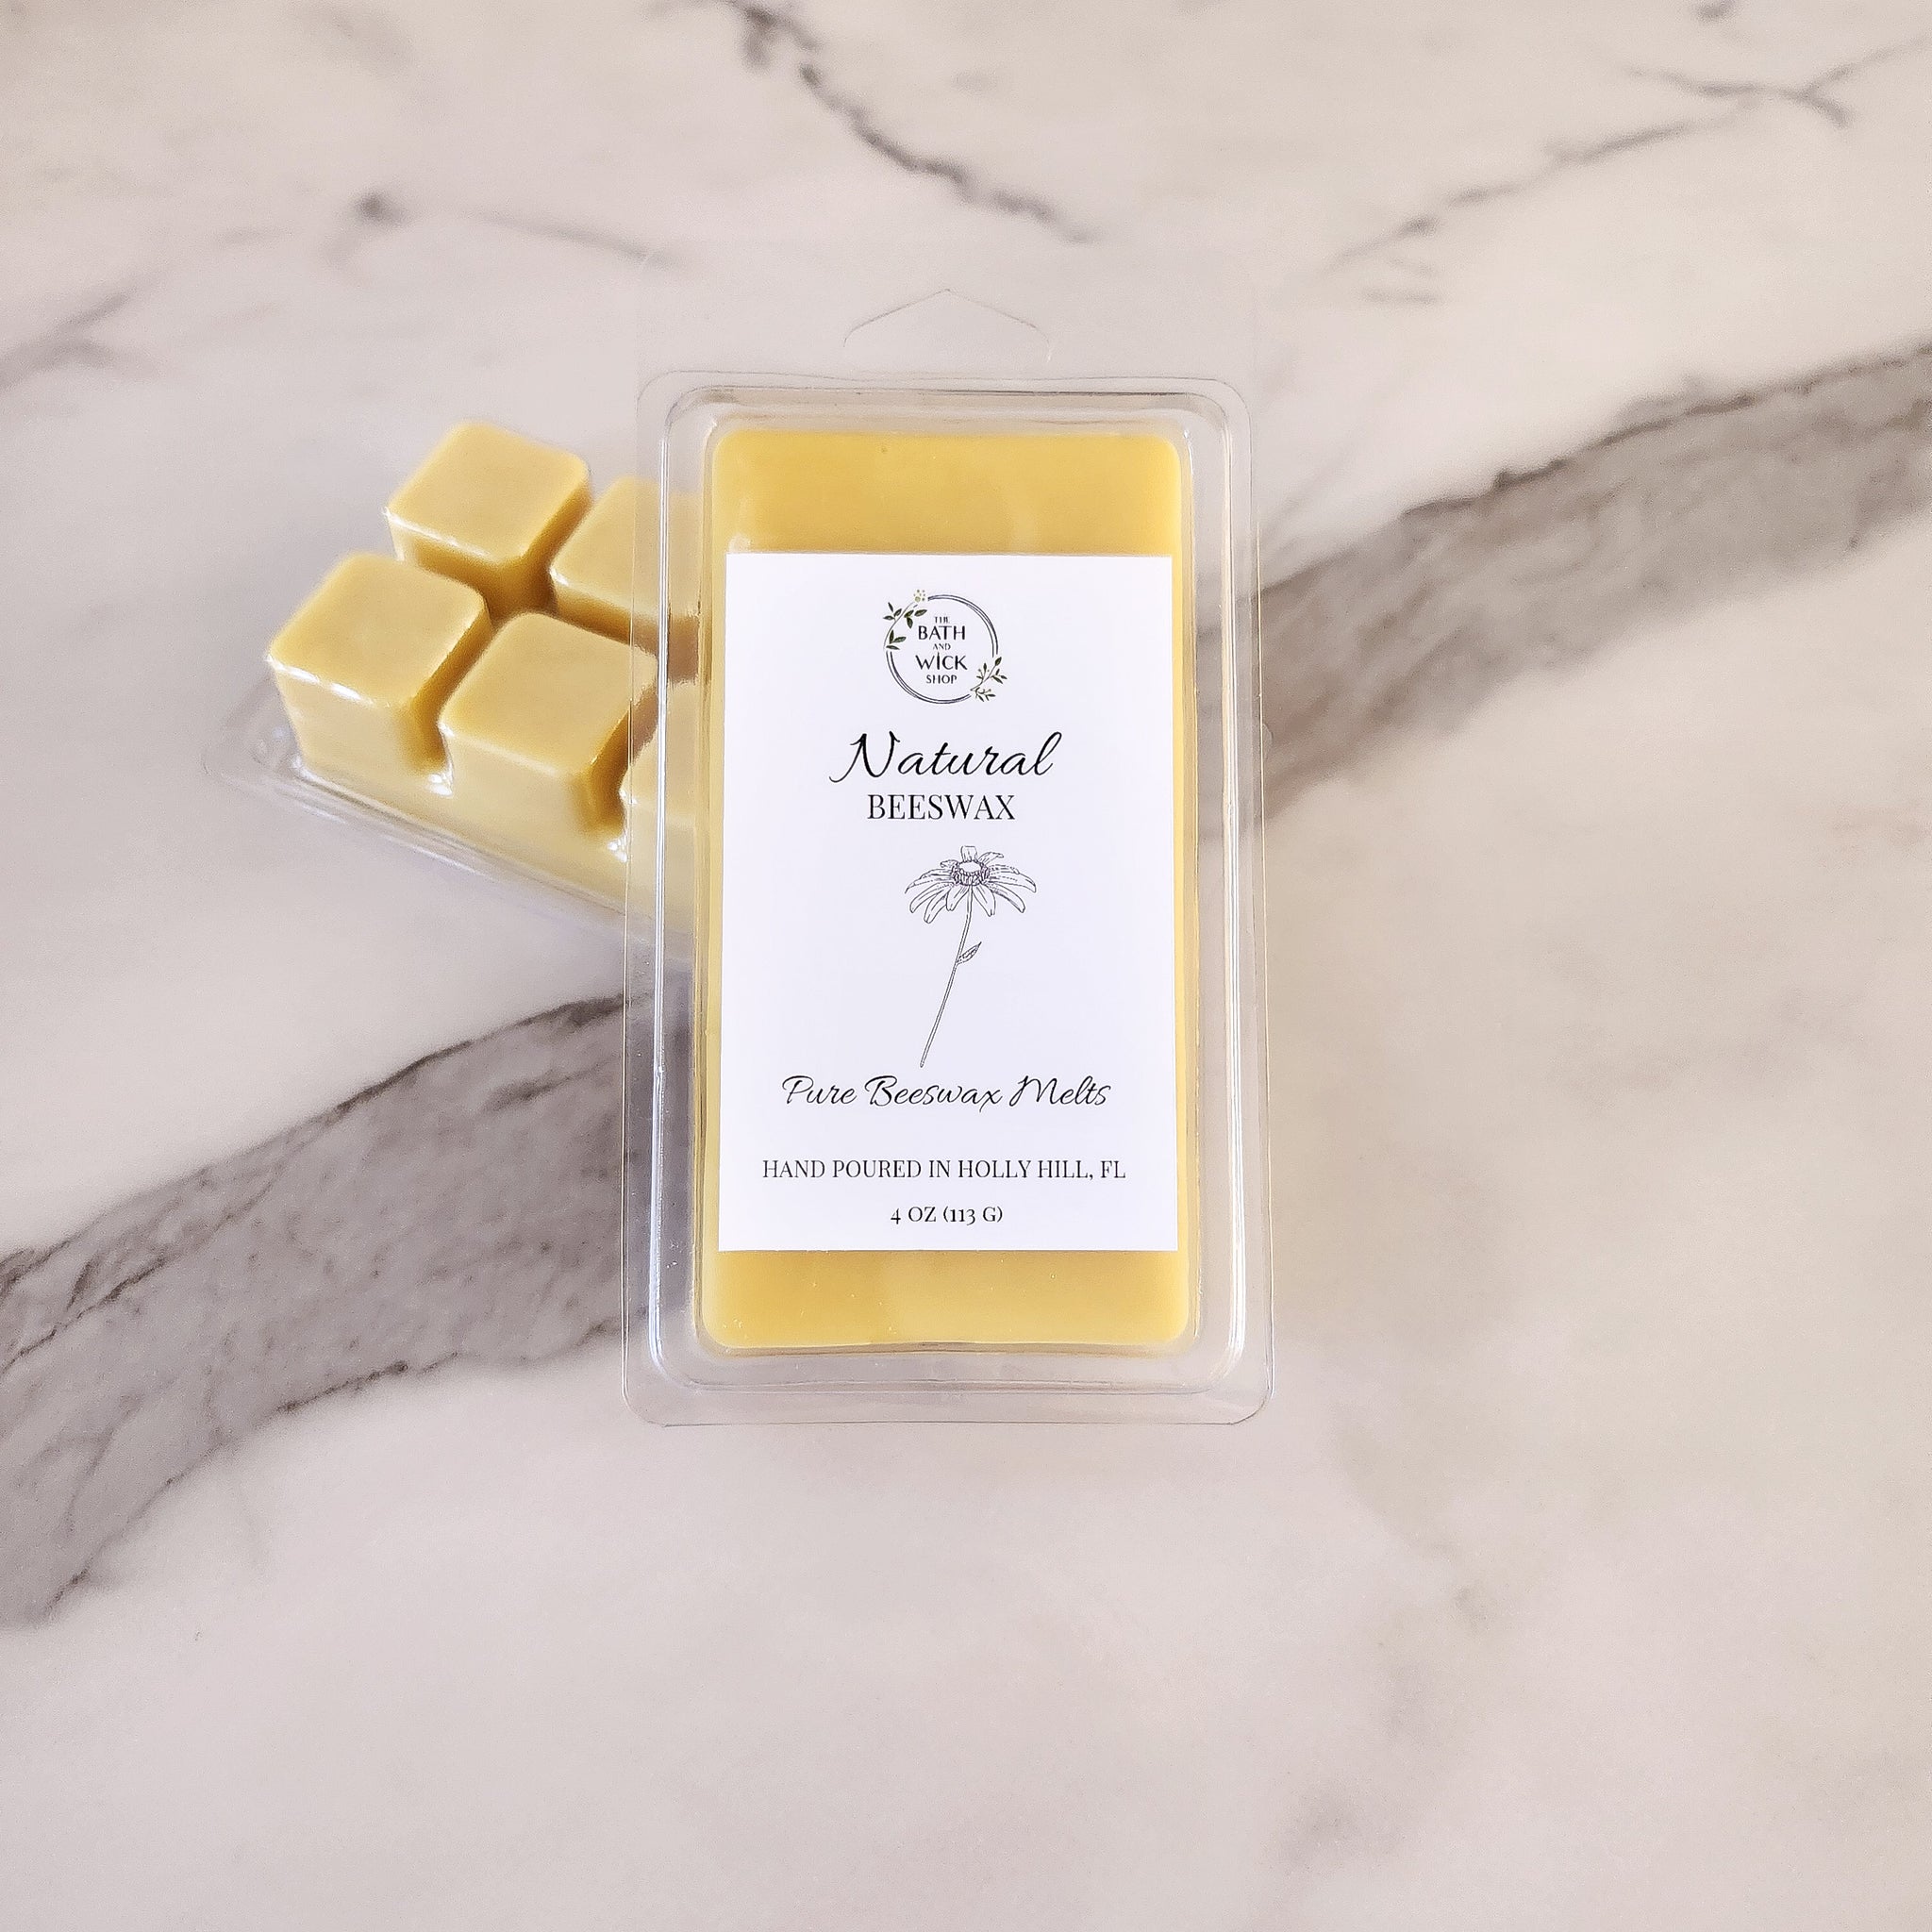 Natural Beeswax (Unscented) Pure Beeswax Melts | Large 8 Cube